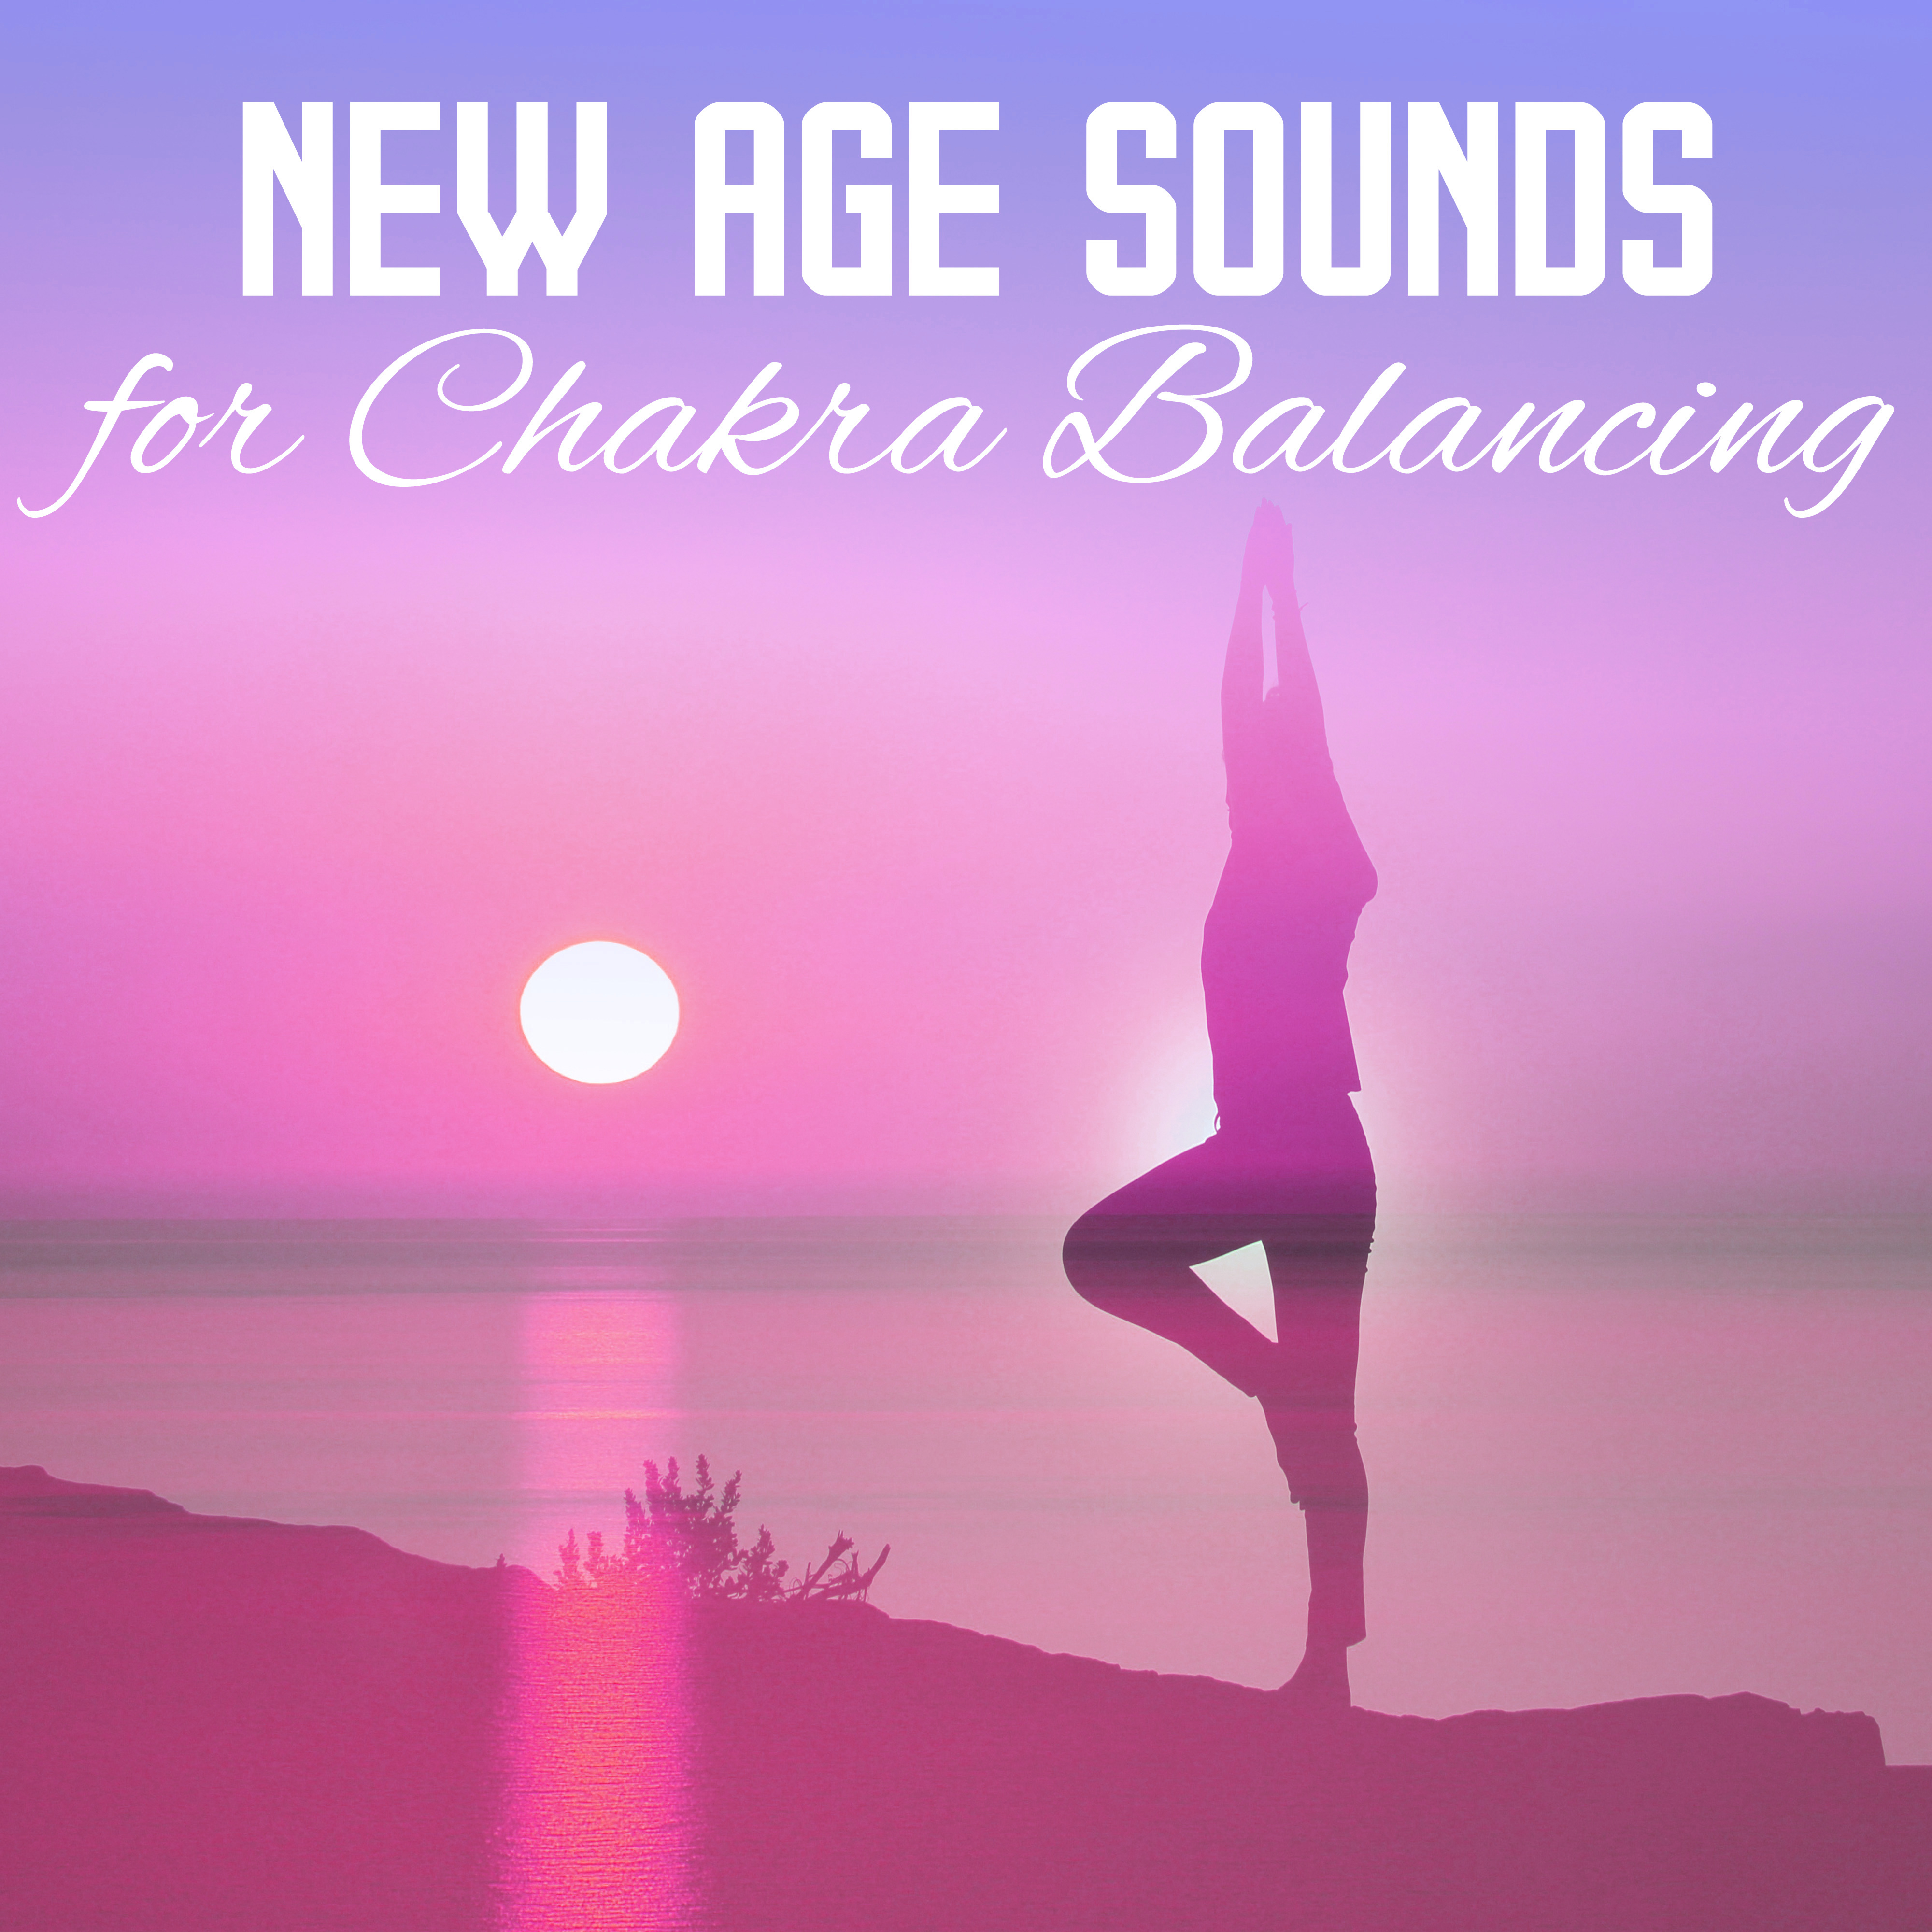 New Age Sounds for Chakra Balancing  Meditation Music, Healing Waves, Calming Sounds, Stress Free